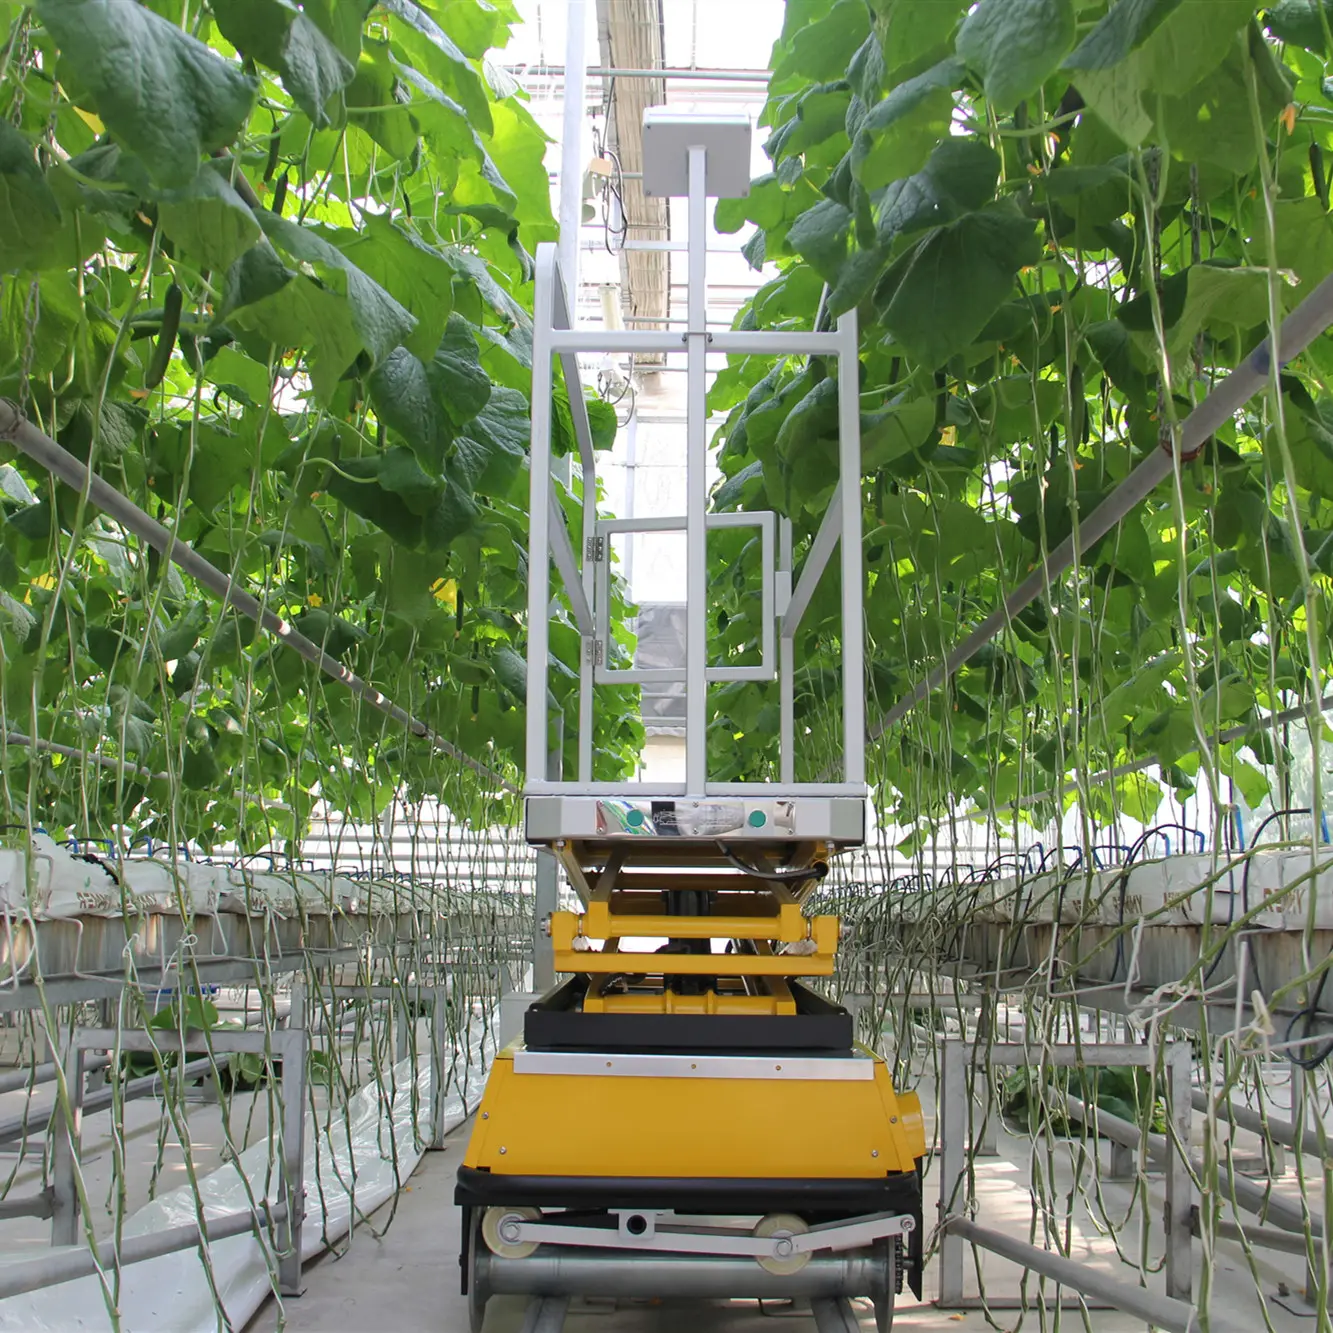 Hydraulic lifting Platform for Greenhouse Vegetable Fruits Picking for Sale